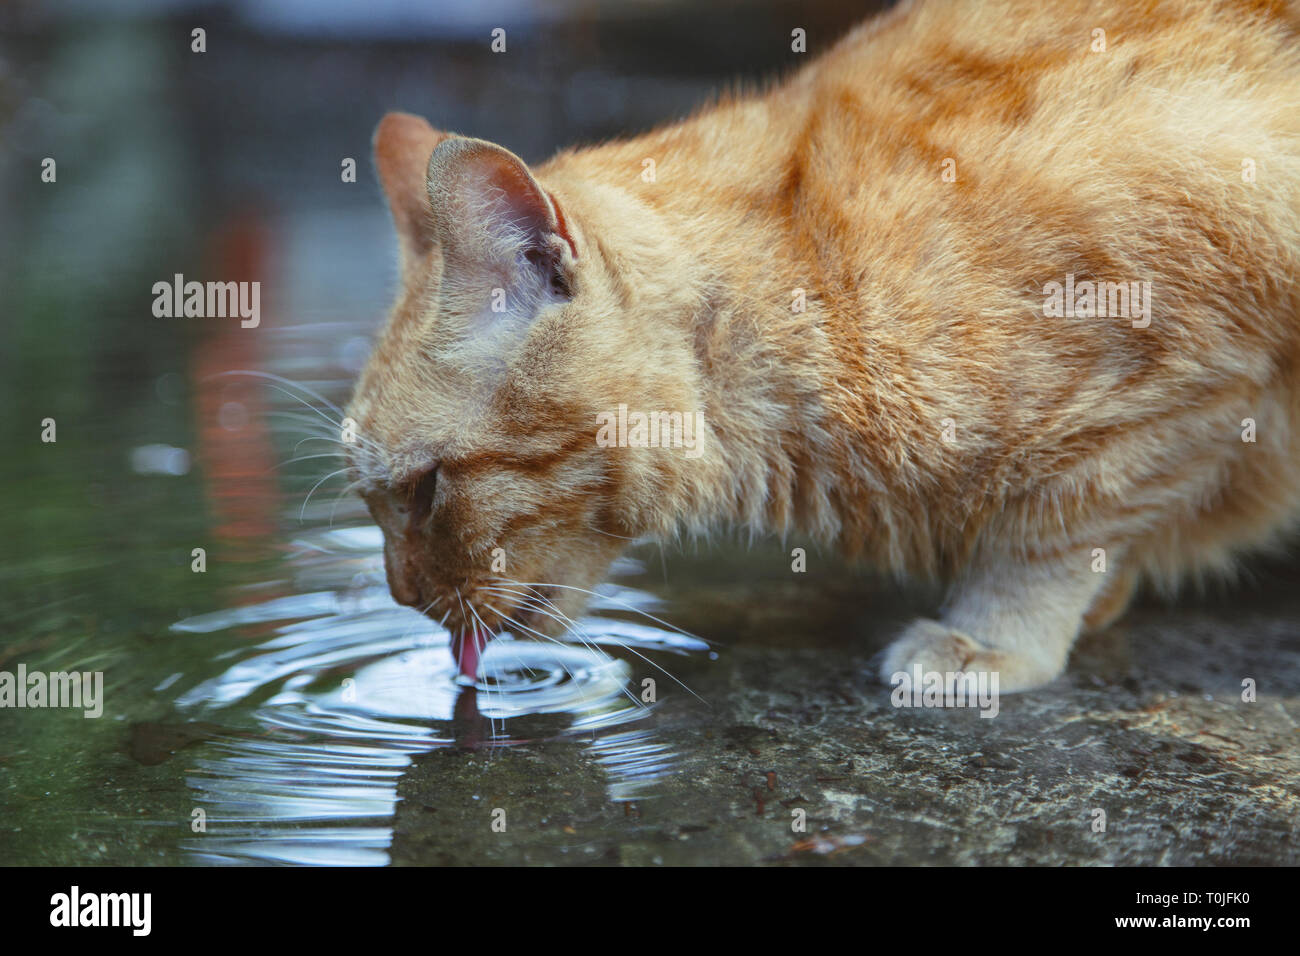 A stray cat drinking water from a puddle Stock Photo